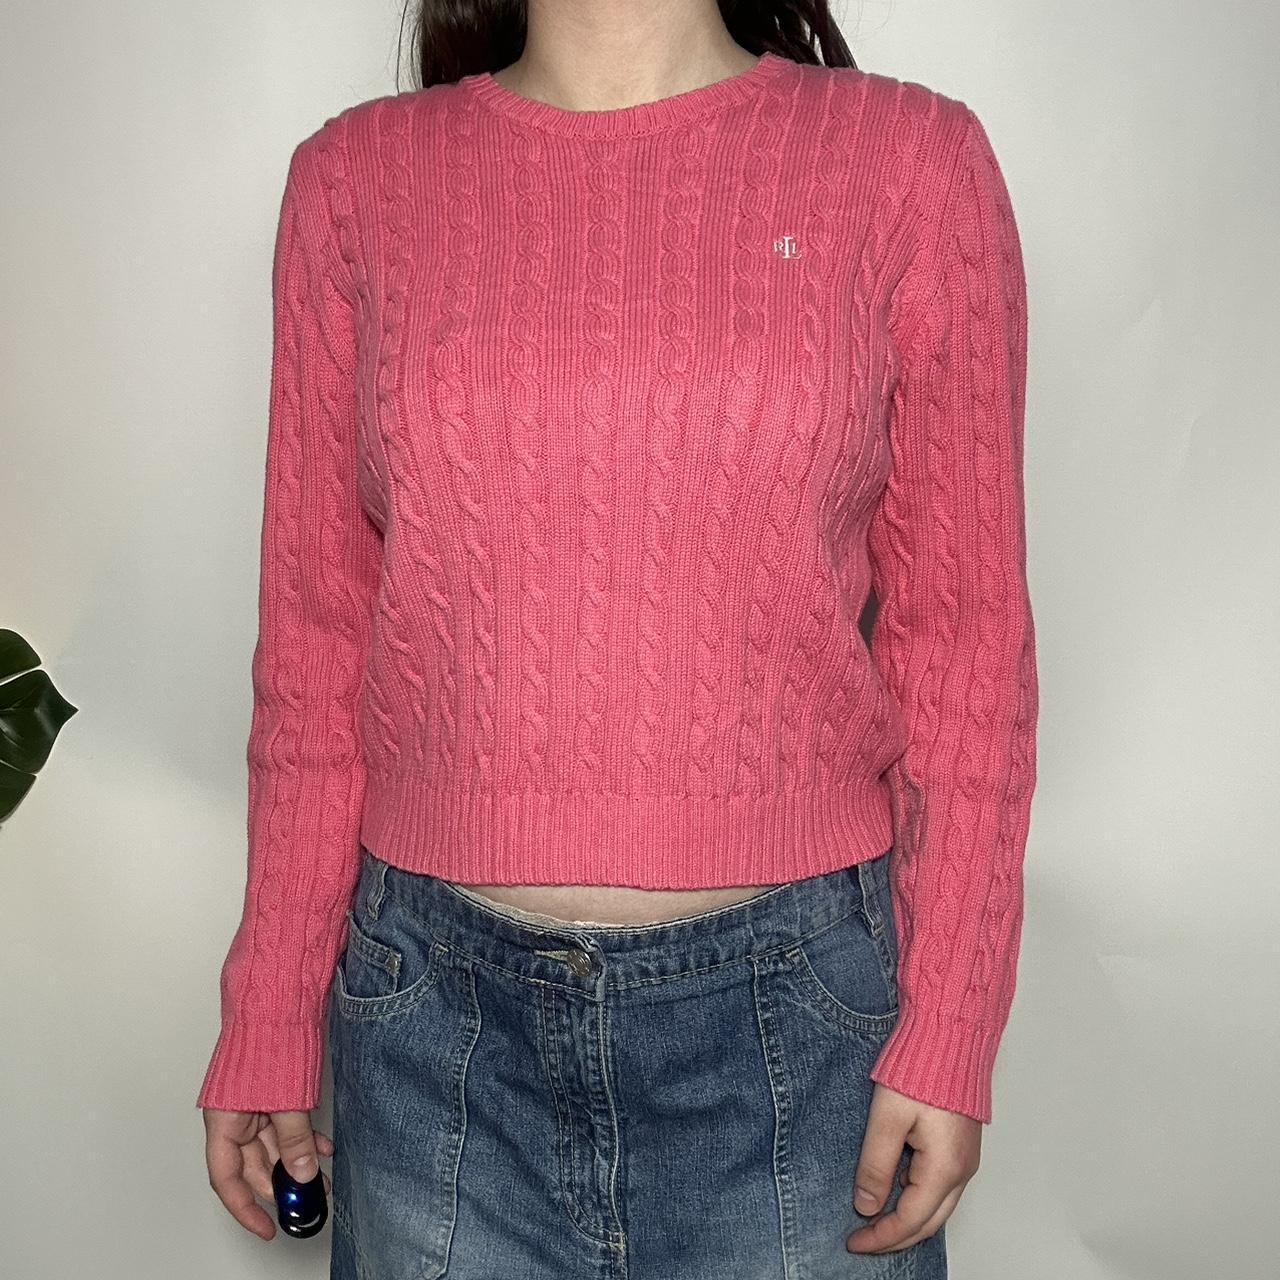 Cute vintage 90s authentic Polo Ralph Lauren pink and white cable knit cropped crew neck jumper with